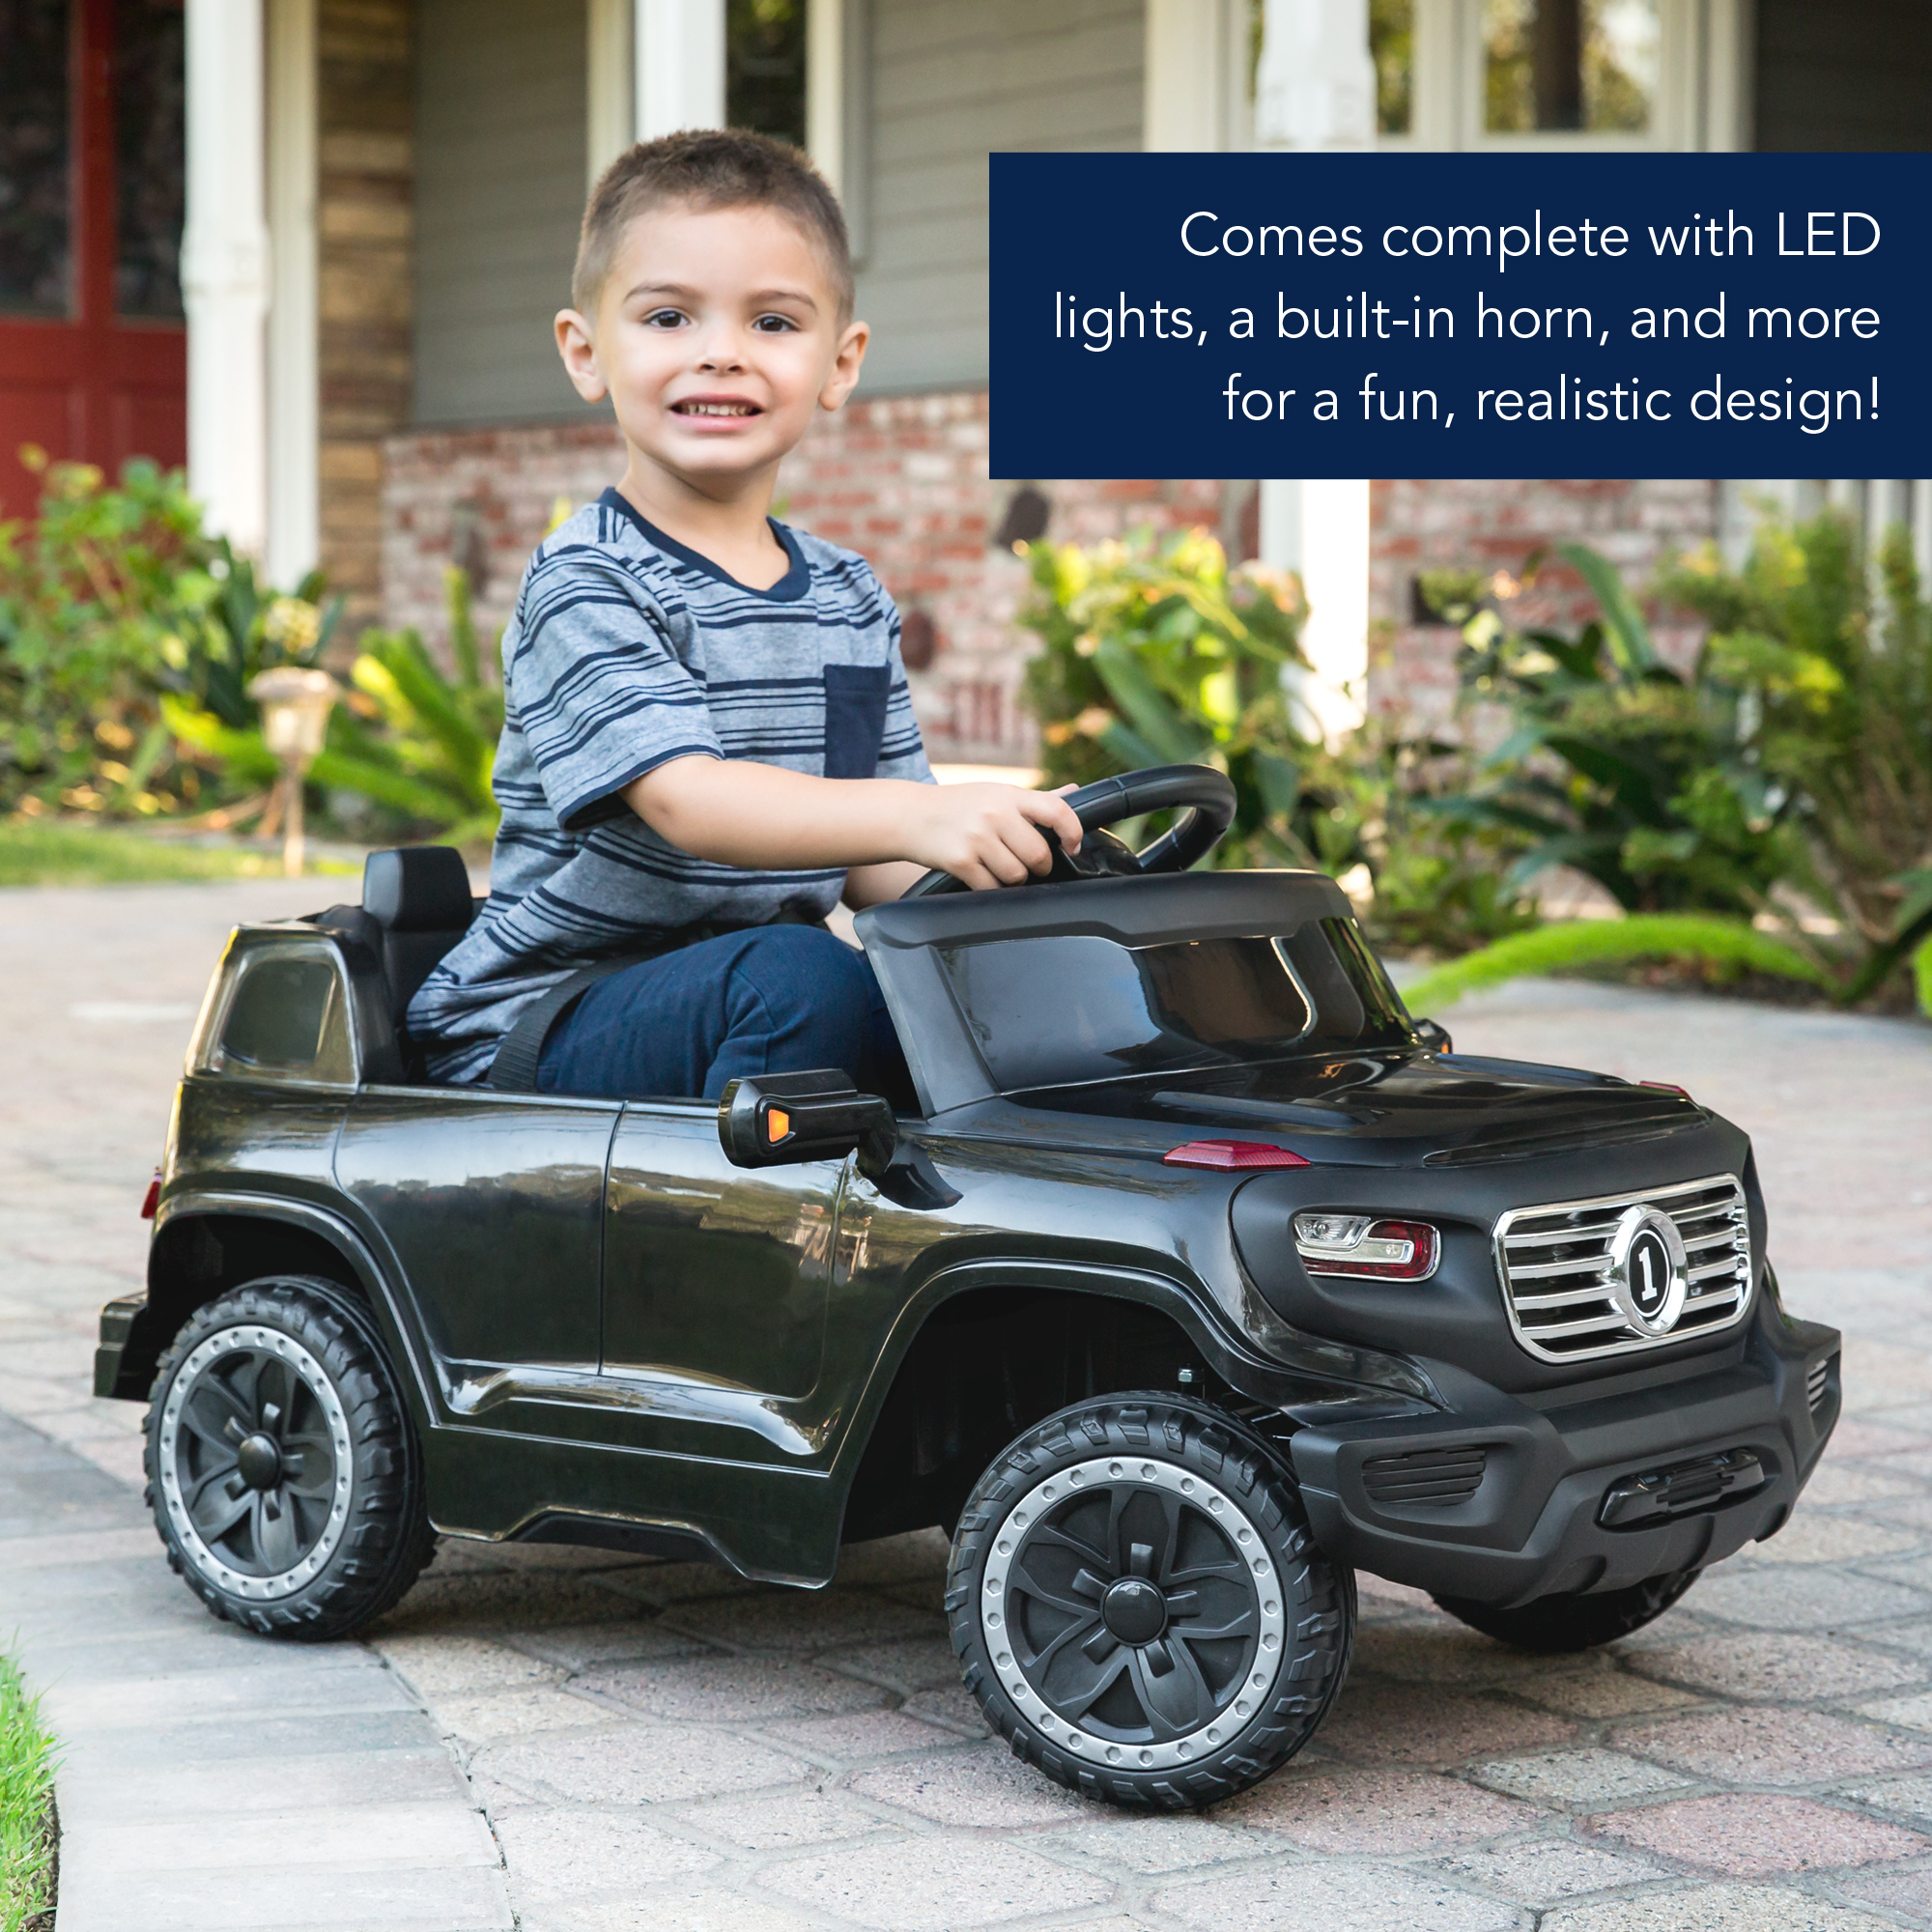 Best Choice Products 6V Kids Ride On Car Truck w/ Parent Control, 3 Speeds, LED Headlights, MP3 Player, Horn - Black - image 3 of 8